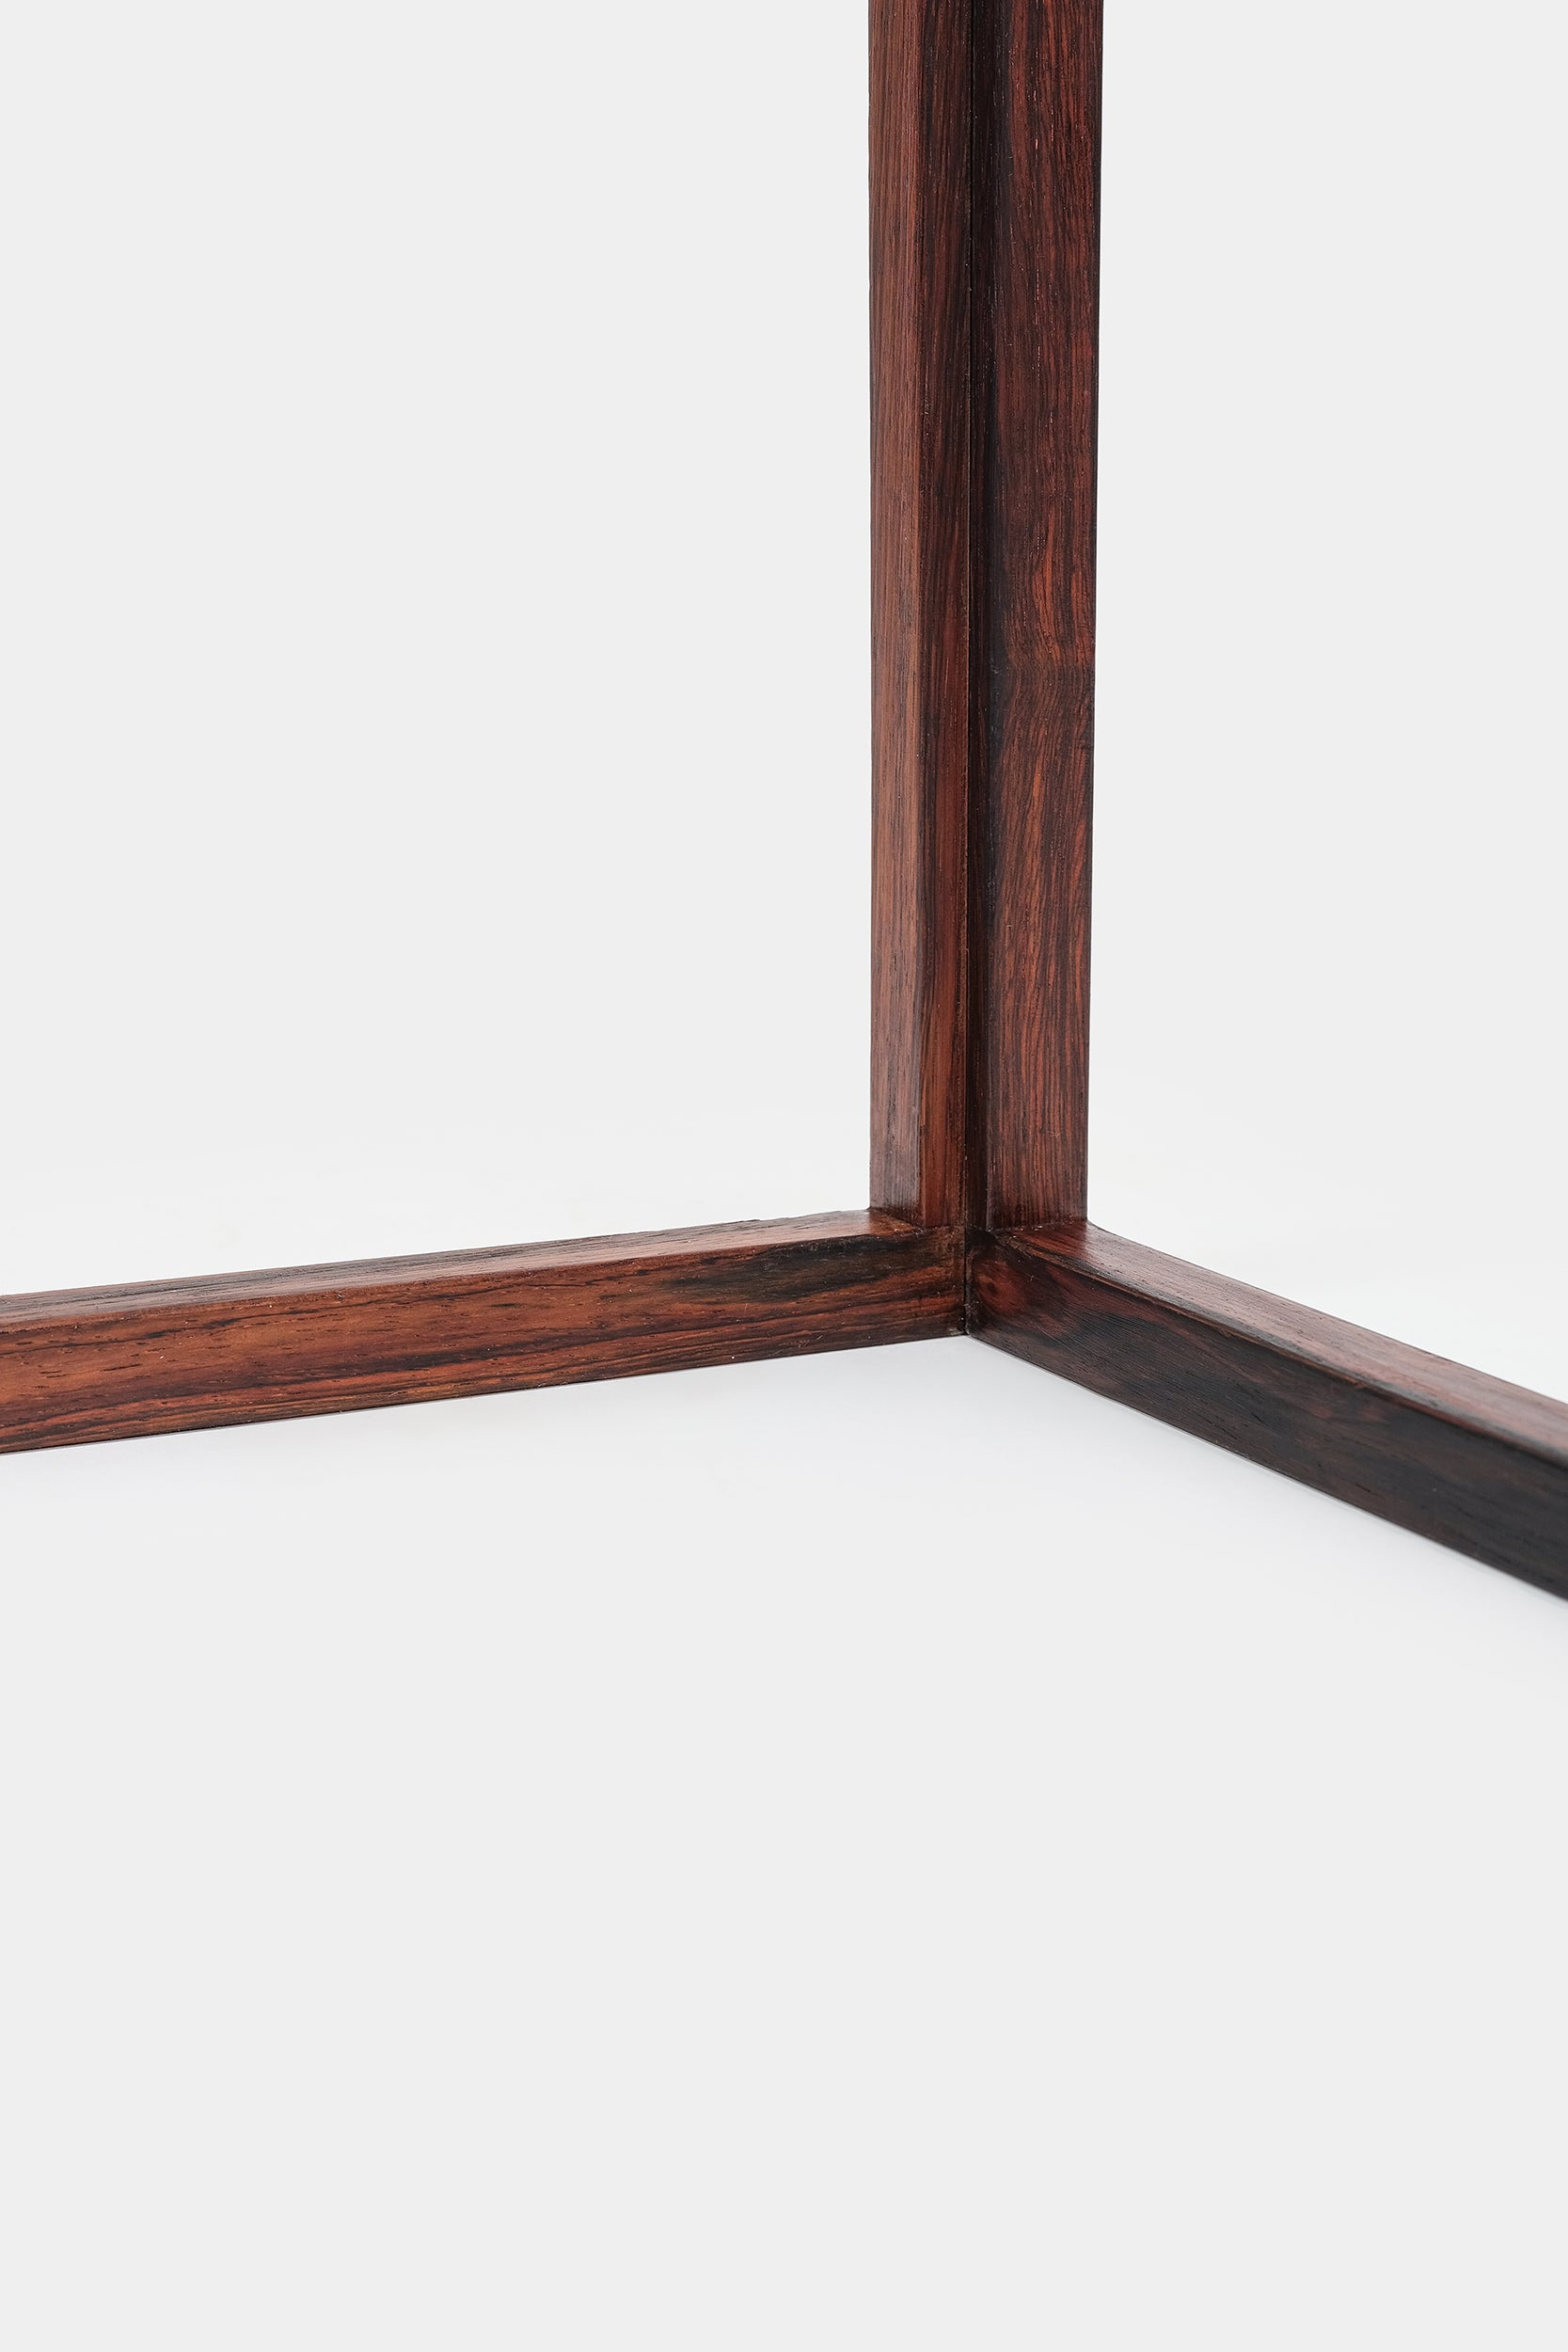 Kai Kristiansen, Club Table, Rosewood with Inset Glass, 60s